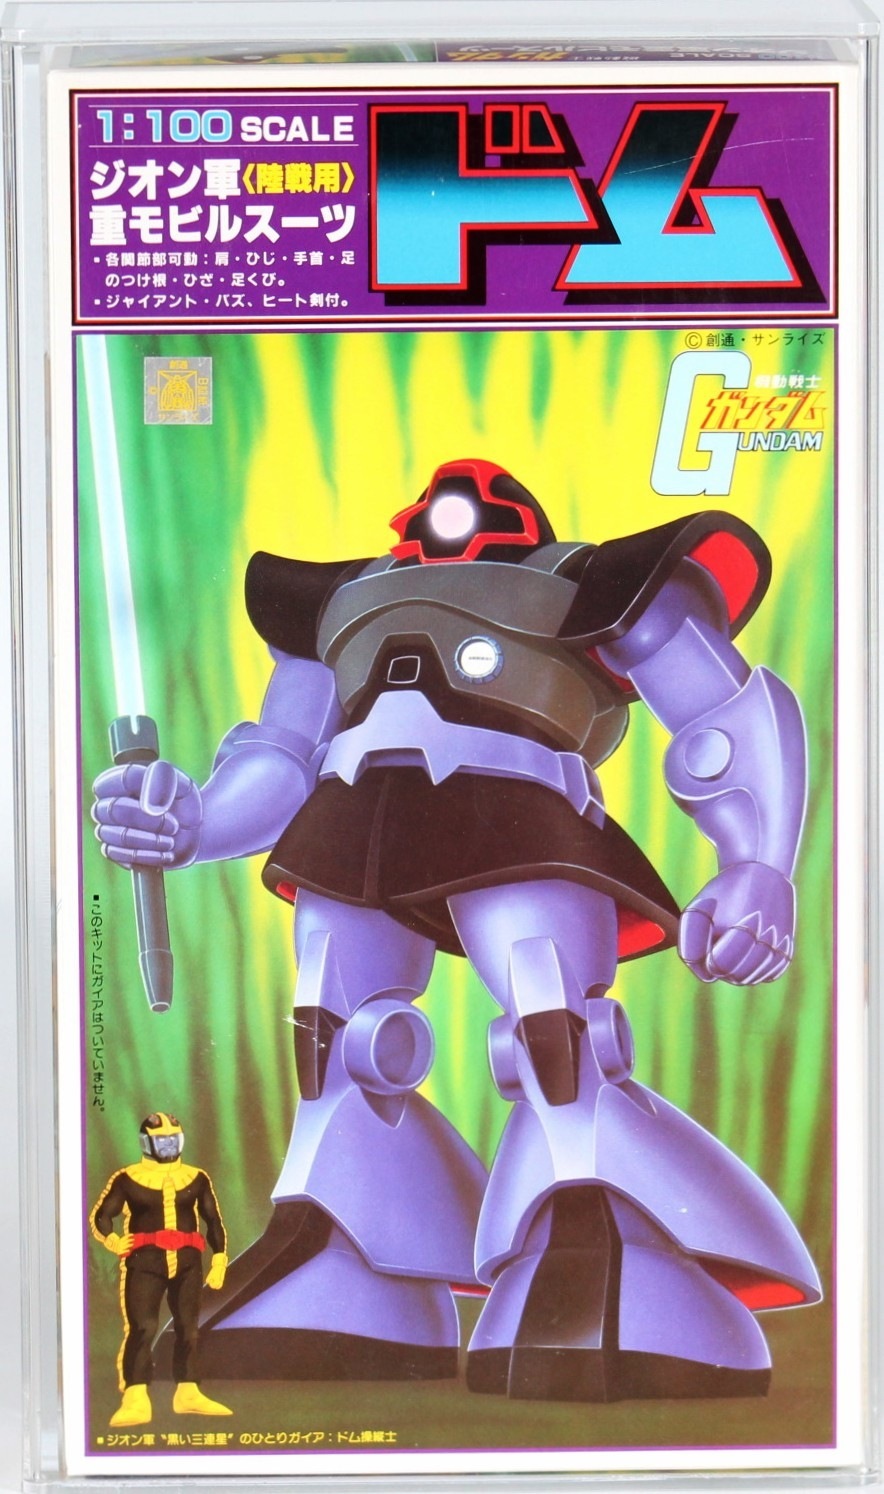 CUSTOM 2018 McFarlane Toys Carded Action Figure - Atom Eve Invincible  Megabox (Signed by Ryan Ottley)